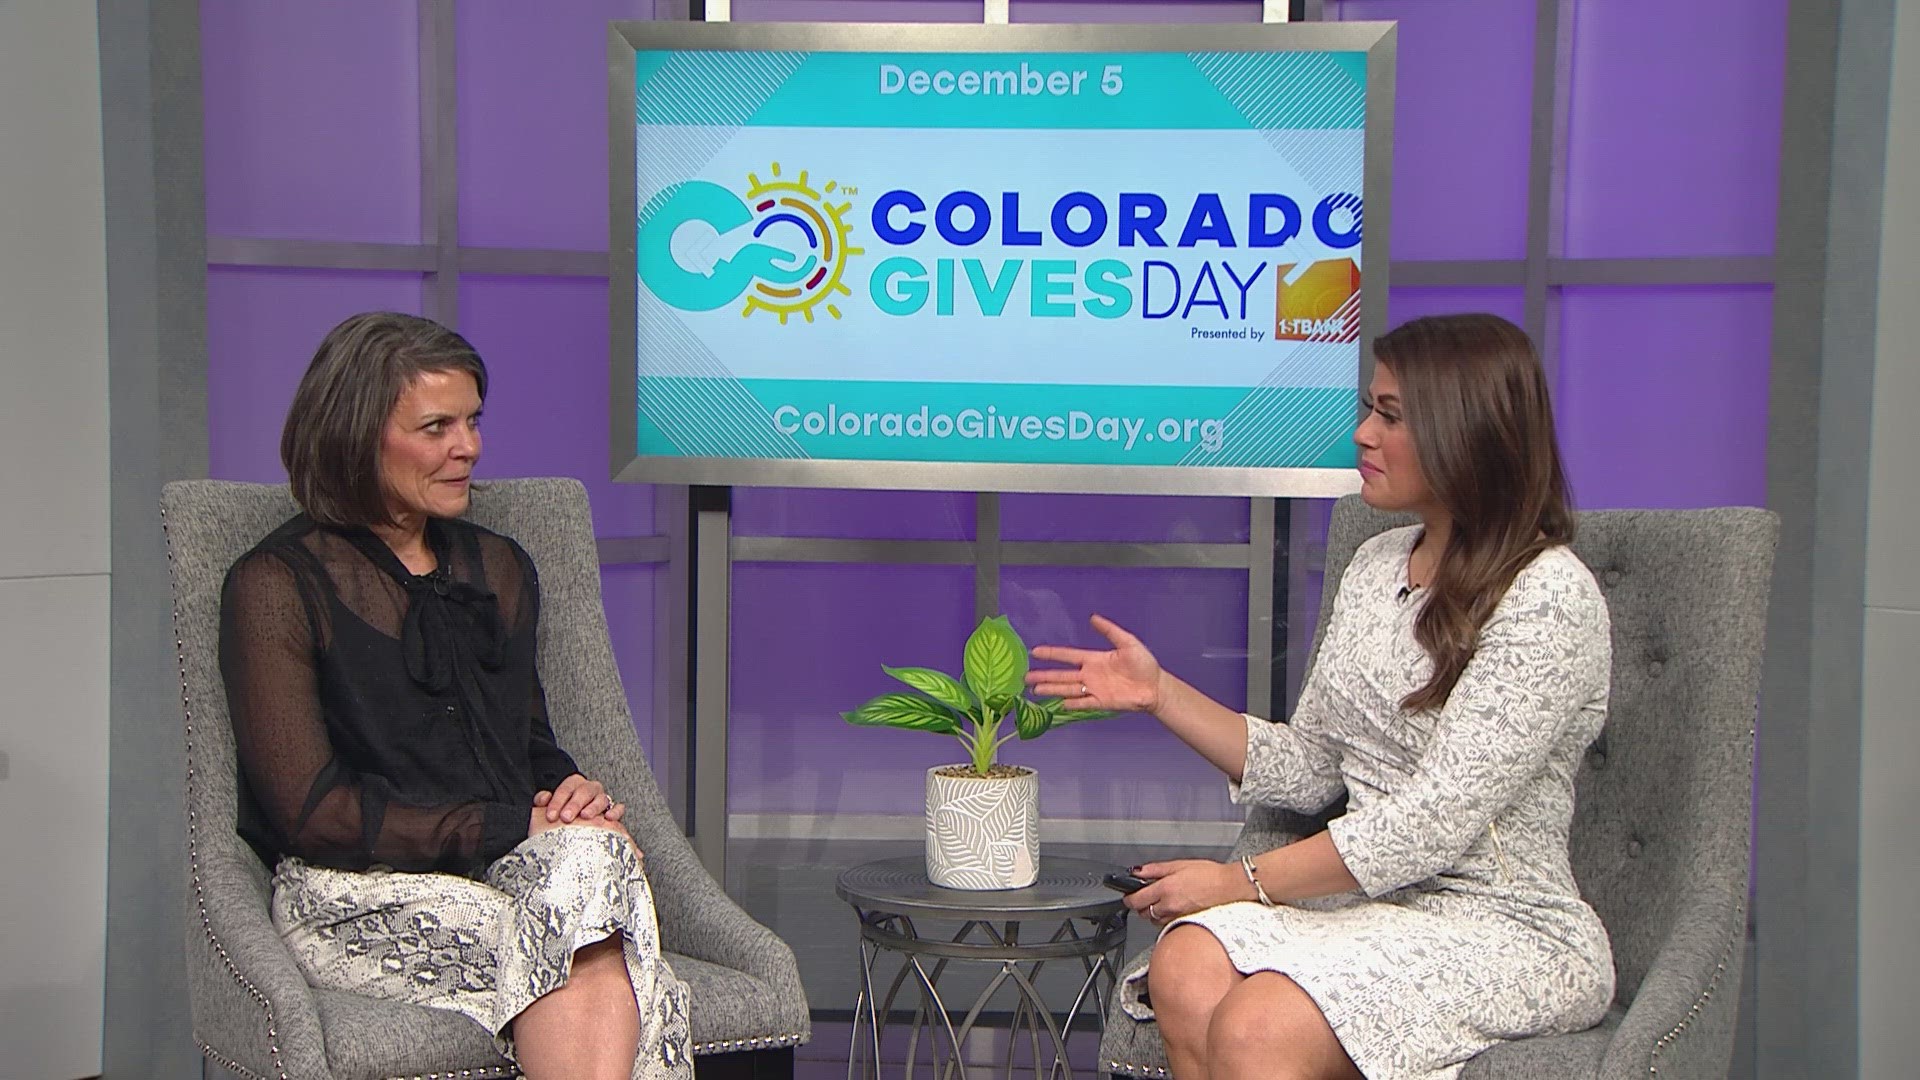 If you’re looking for an easy way to give back this holiday season, you can donate to your favorite Colorado nonprofits on Colorado Gives Day.